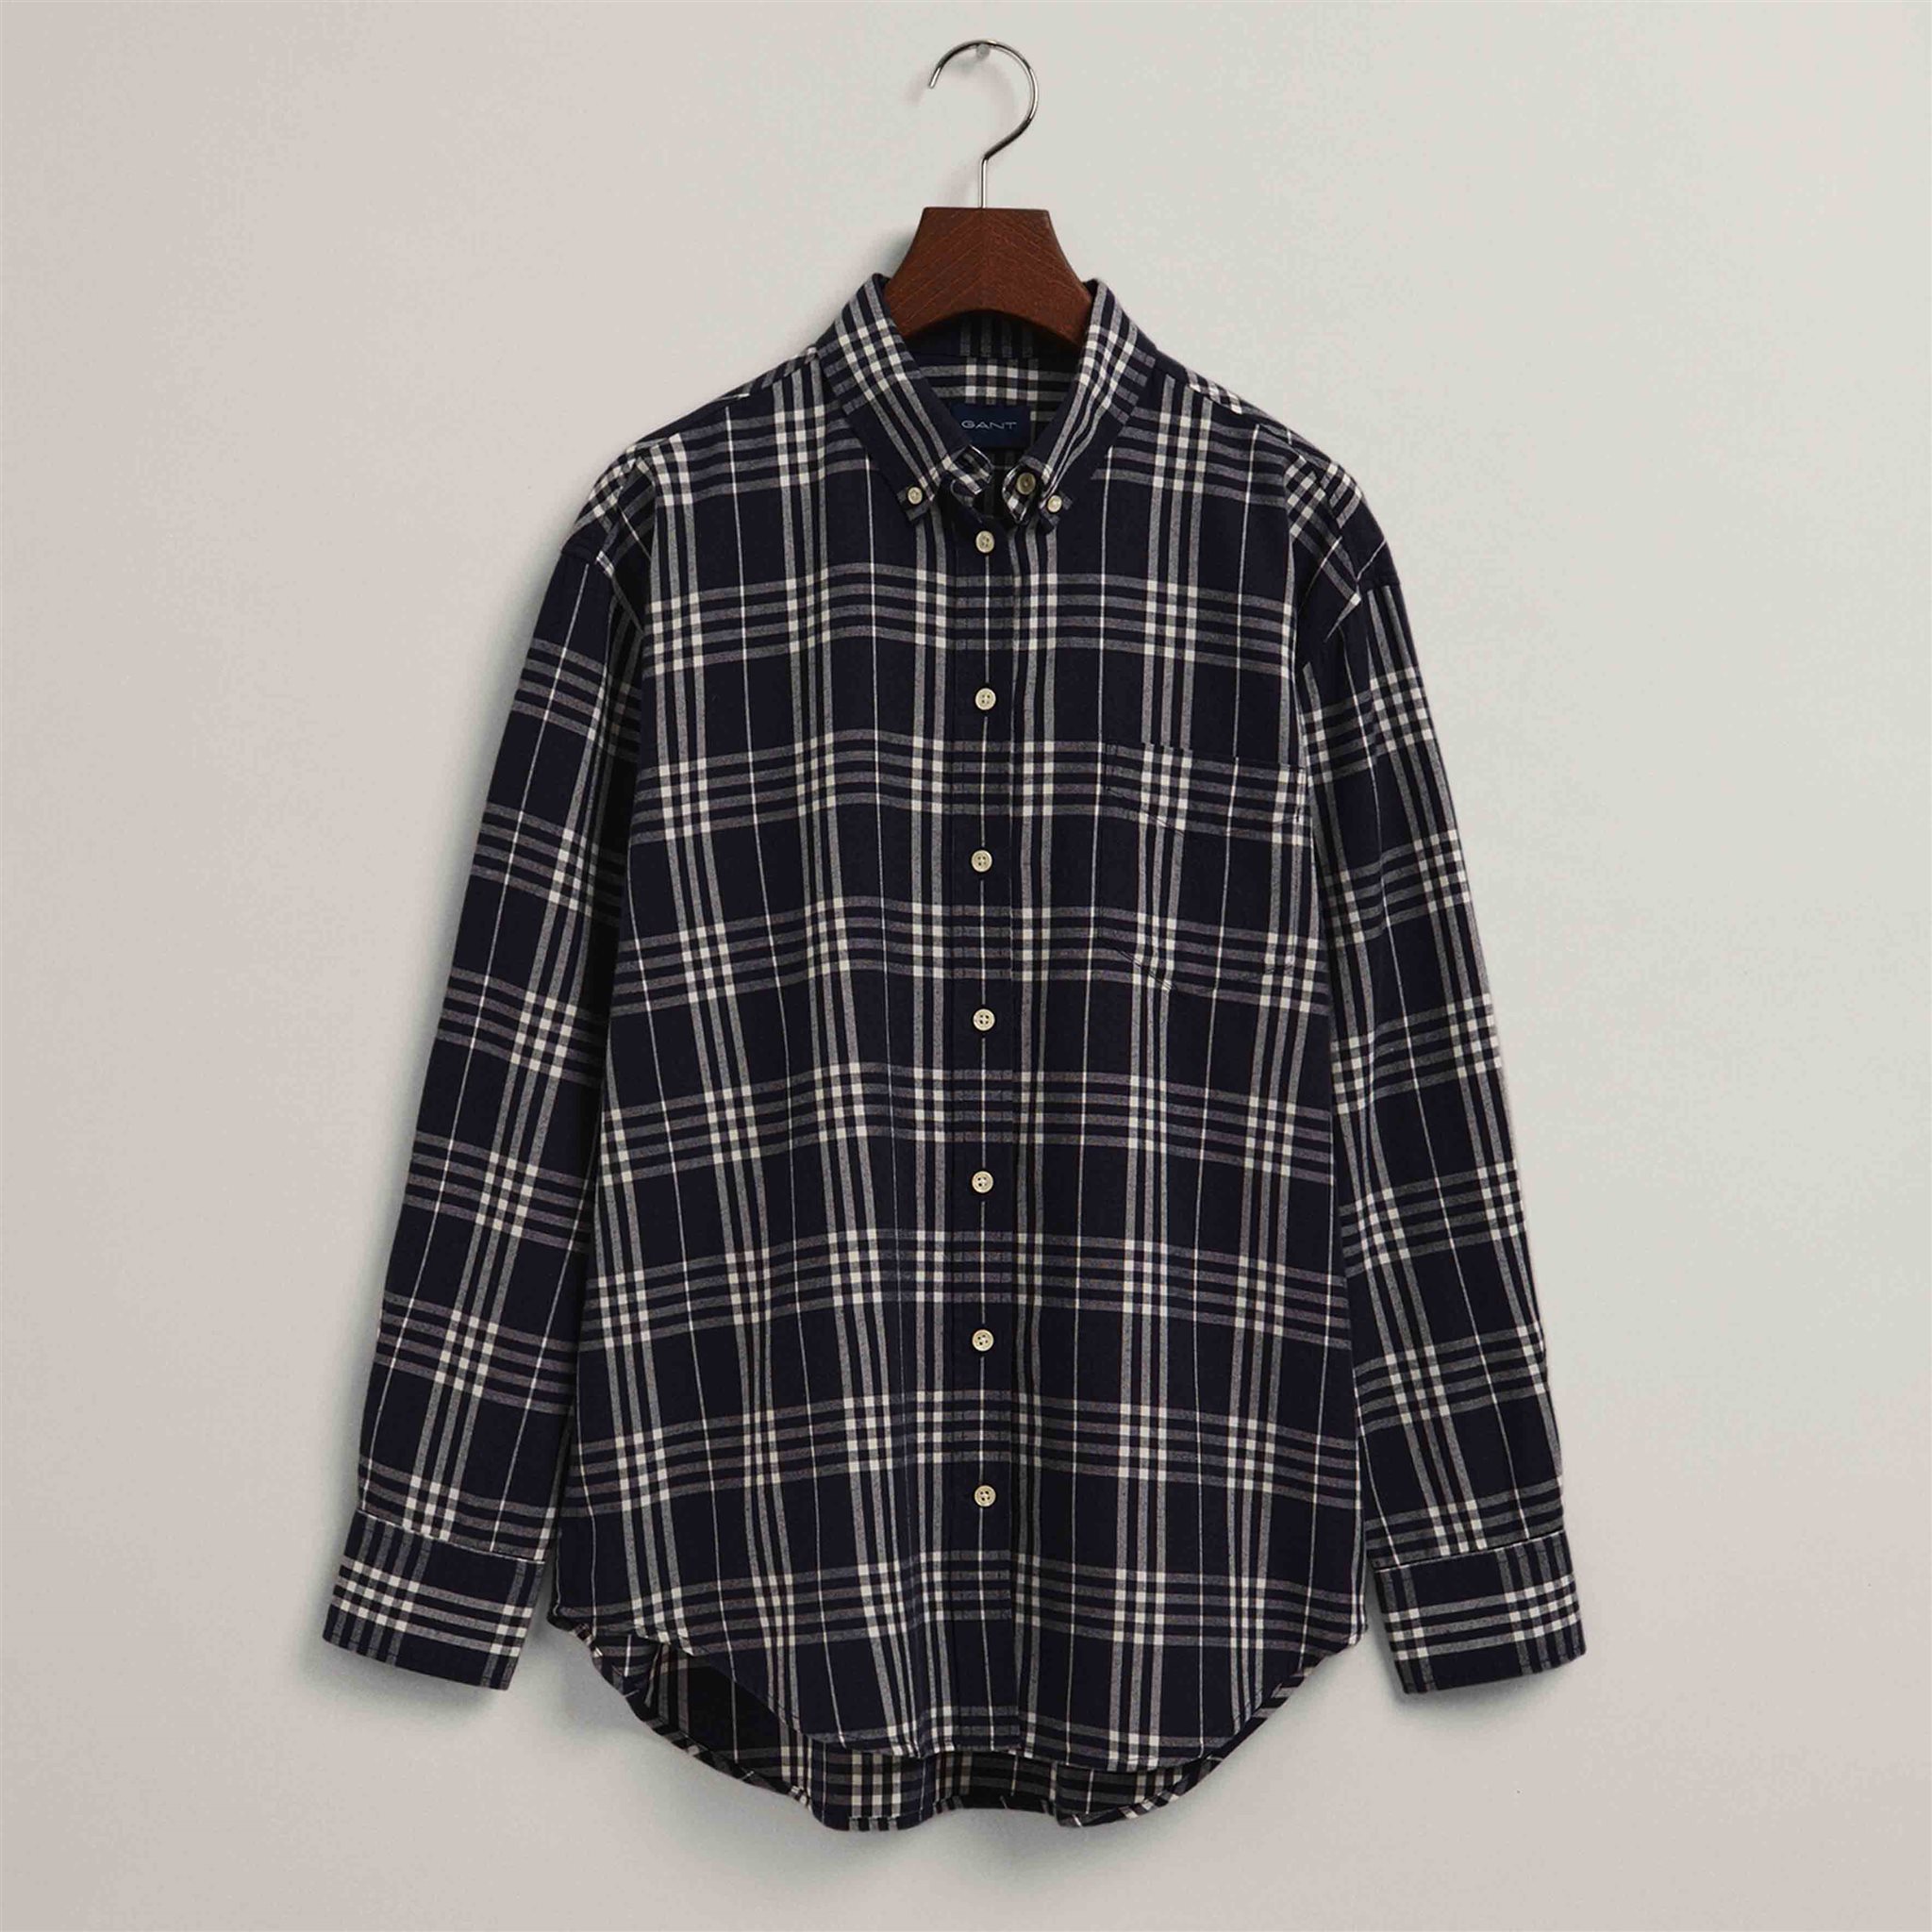 RELAXED CHECK FLANNEL SHIRT GANT WOMAN